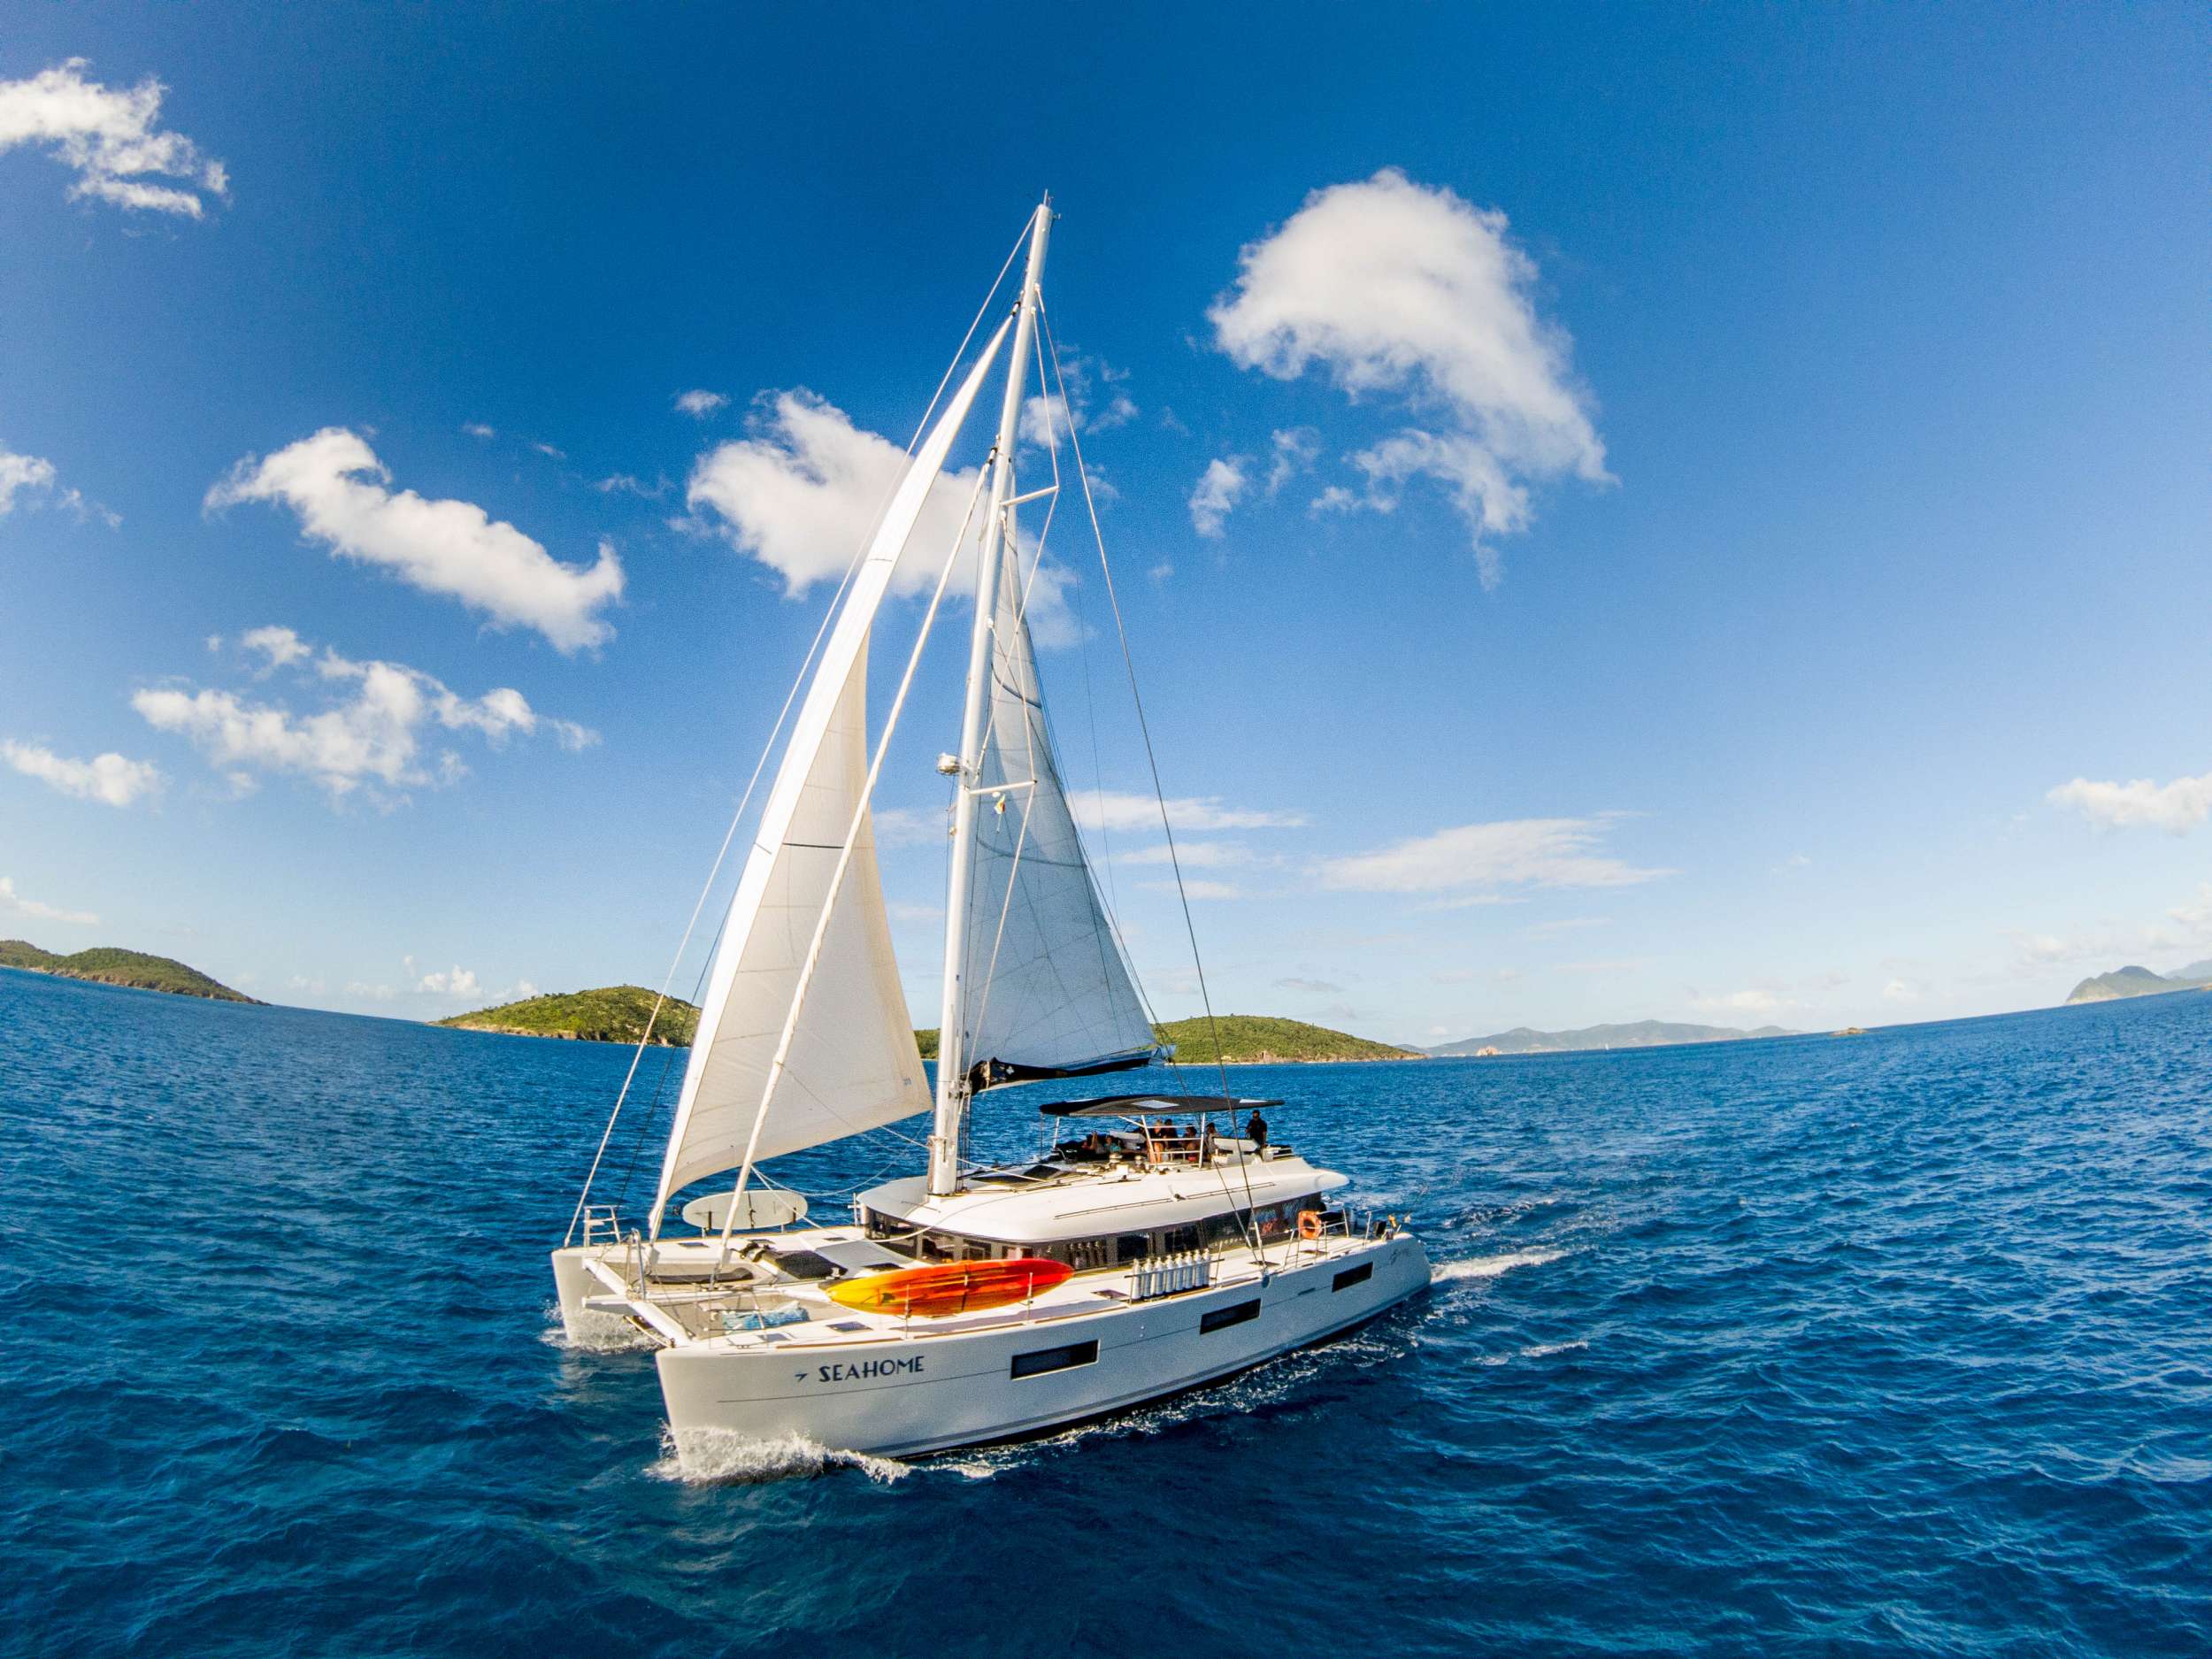 seahome - Luxury Yacht Charter US Virgin Islands & Boat hire in Caribbean 1